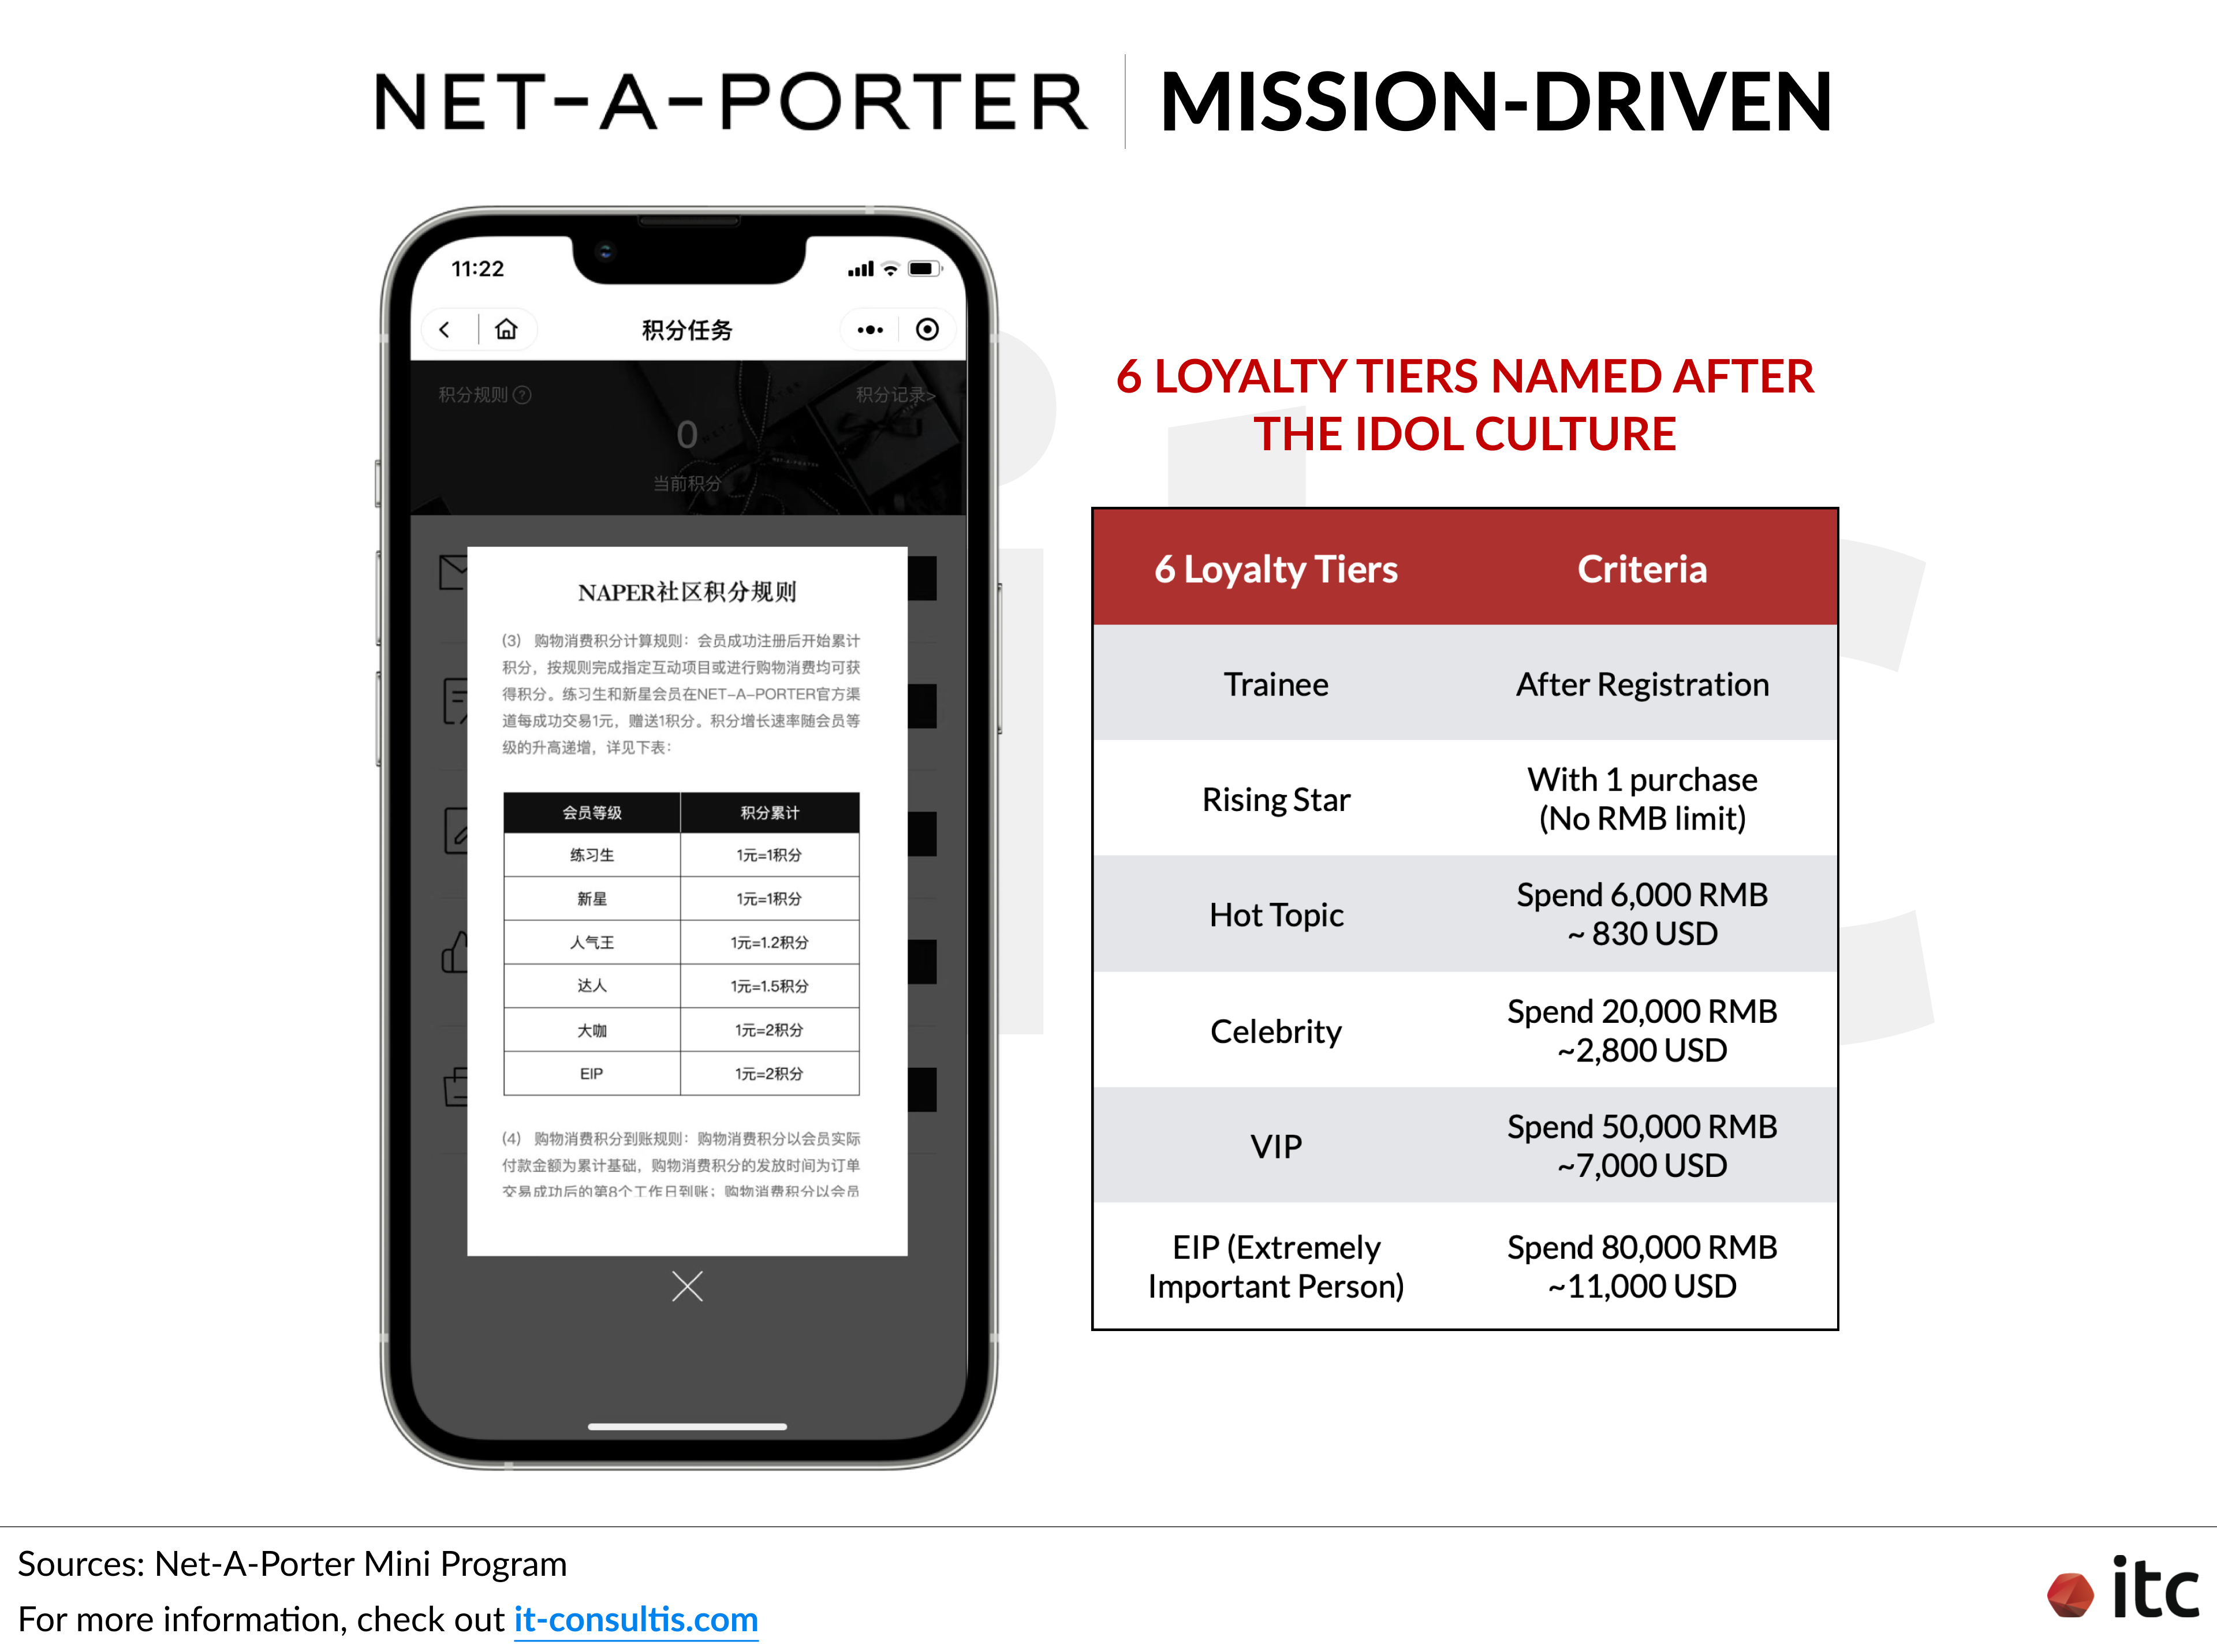 Net-A-Porter's luxury loyalty WeChat Mini Program features a mission-driven theme that takes inspiration from the burgeoning idol economy and culture in China